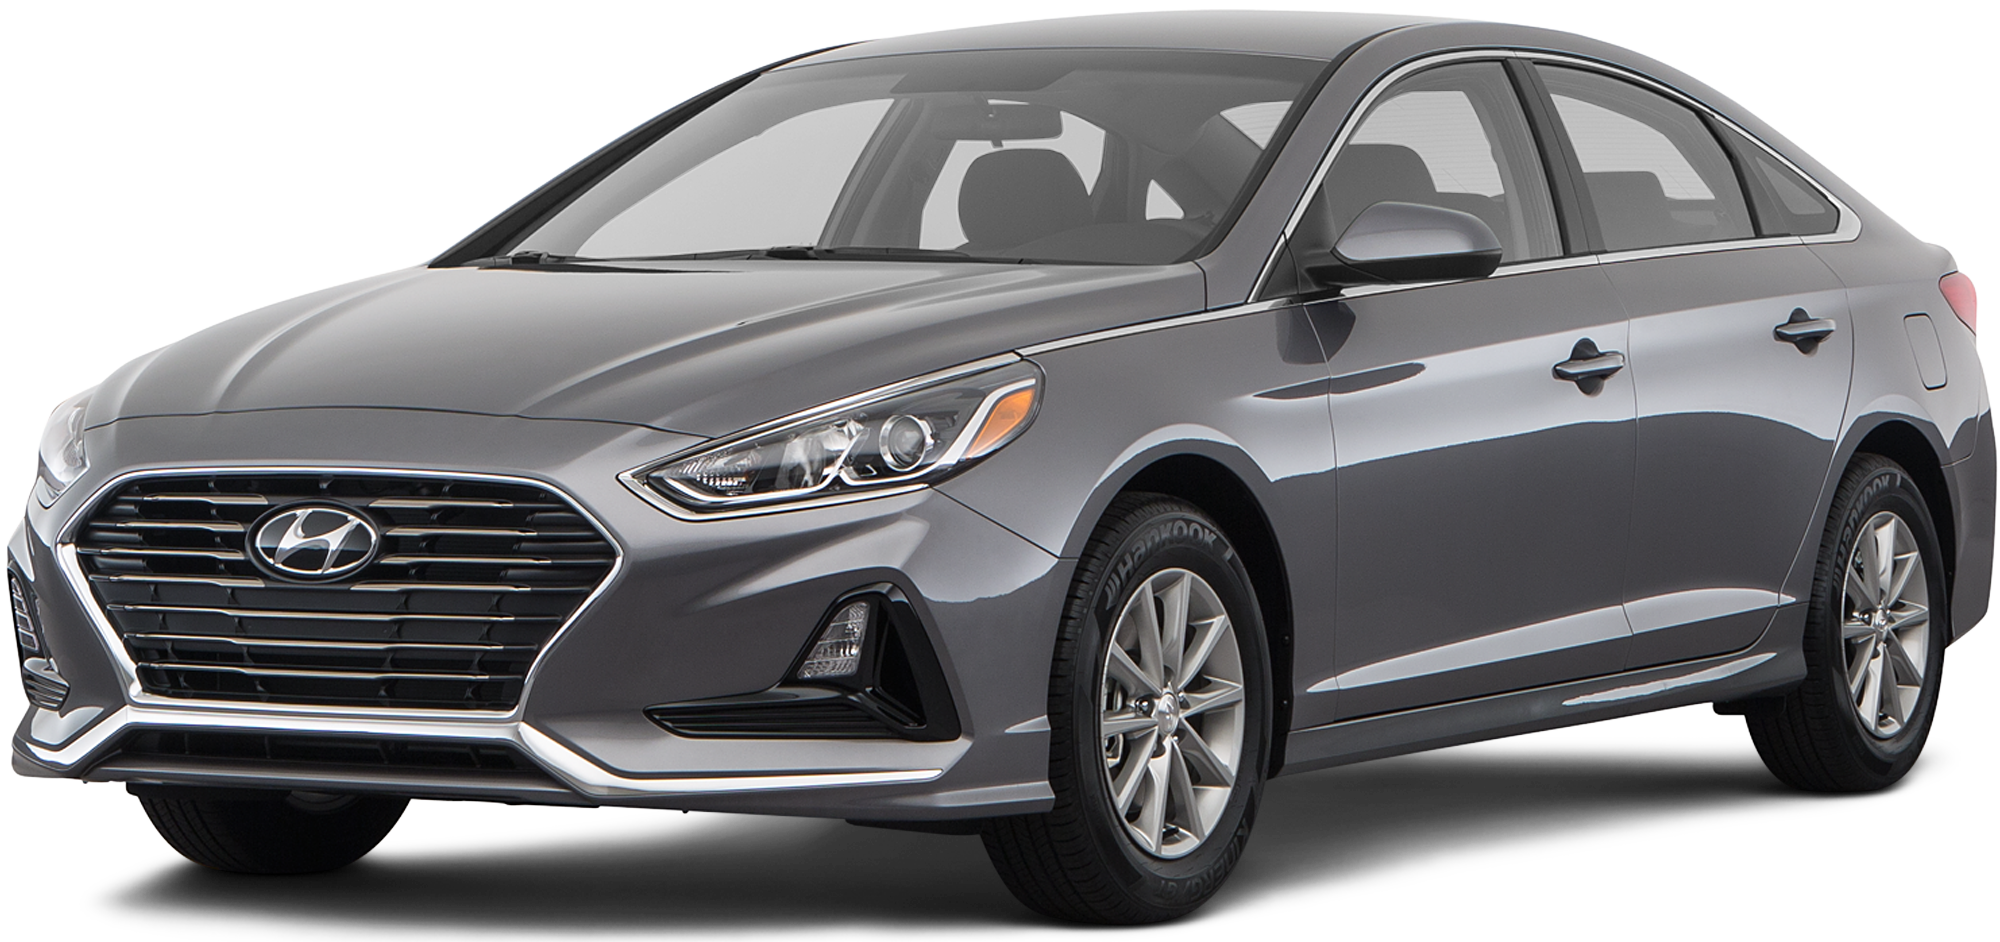 2019-hyundai-sonata-incentives-specials-offers-in-towson-md